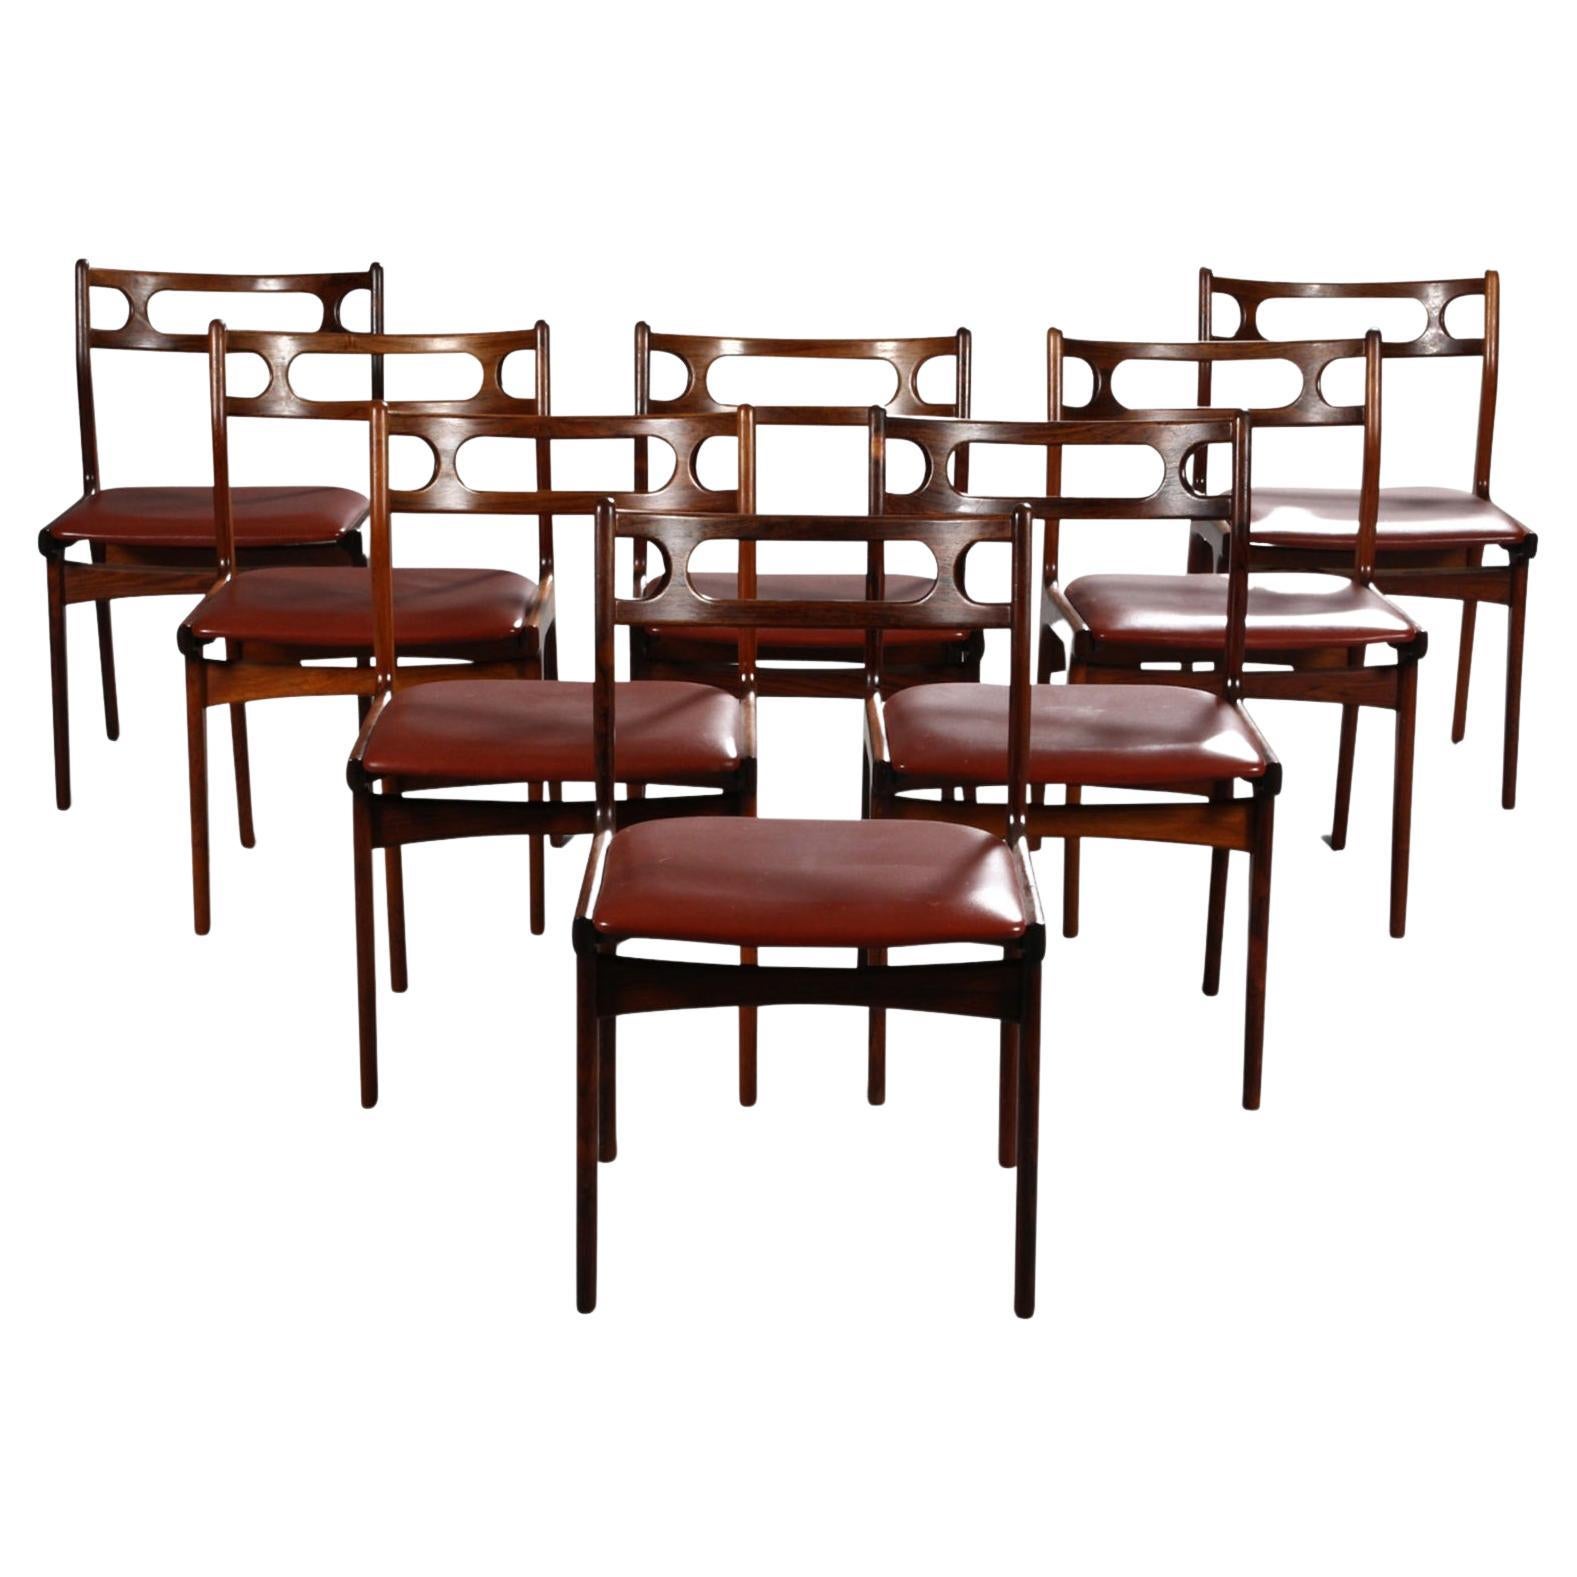 Set of 8 Rosewood Model 138 Dining Chairs by Johannes Andersen